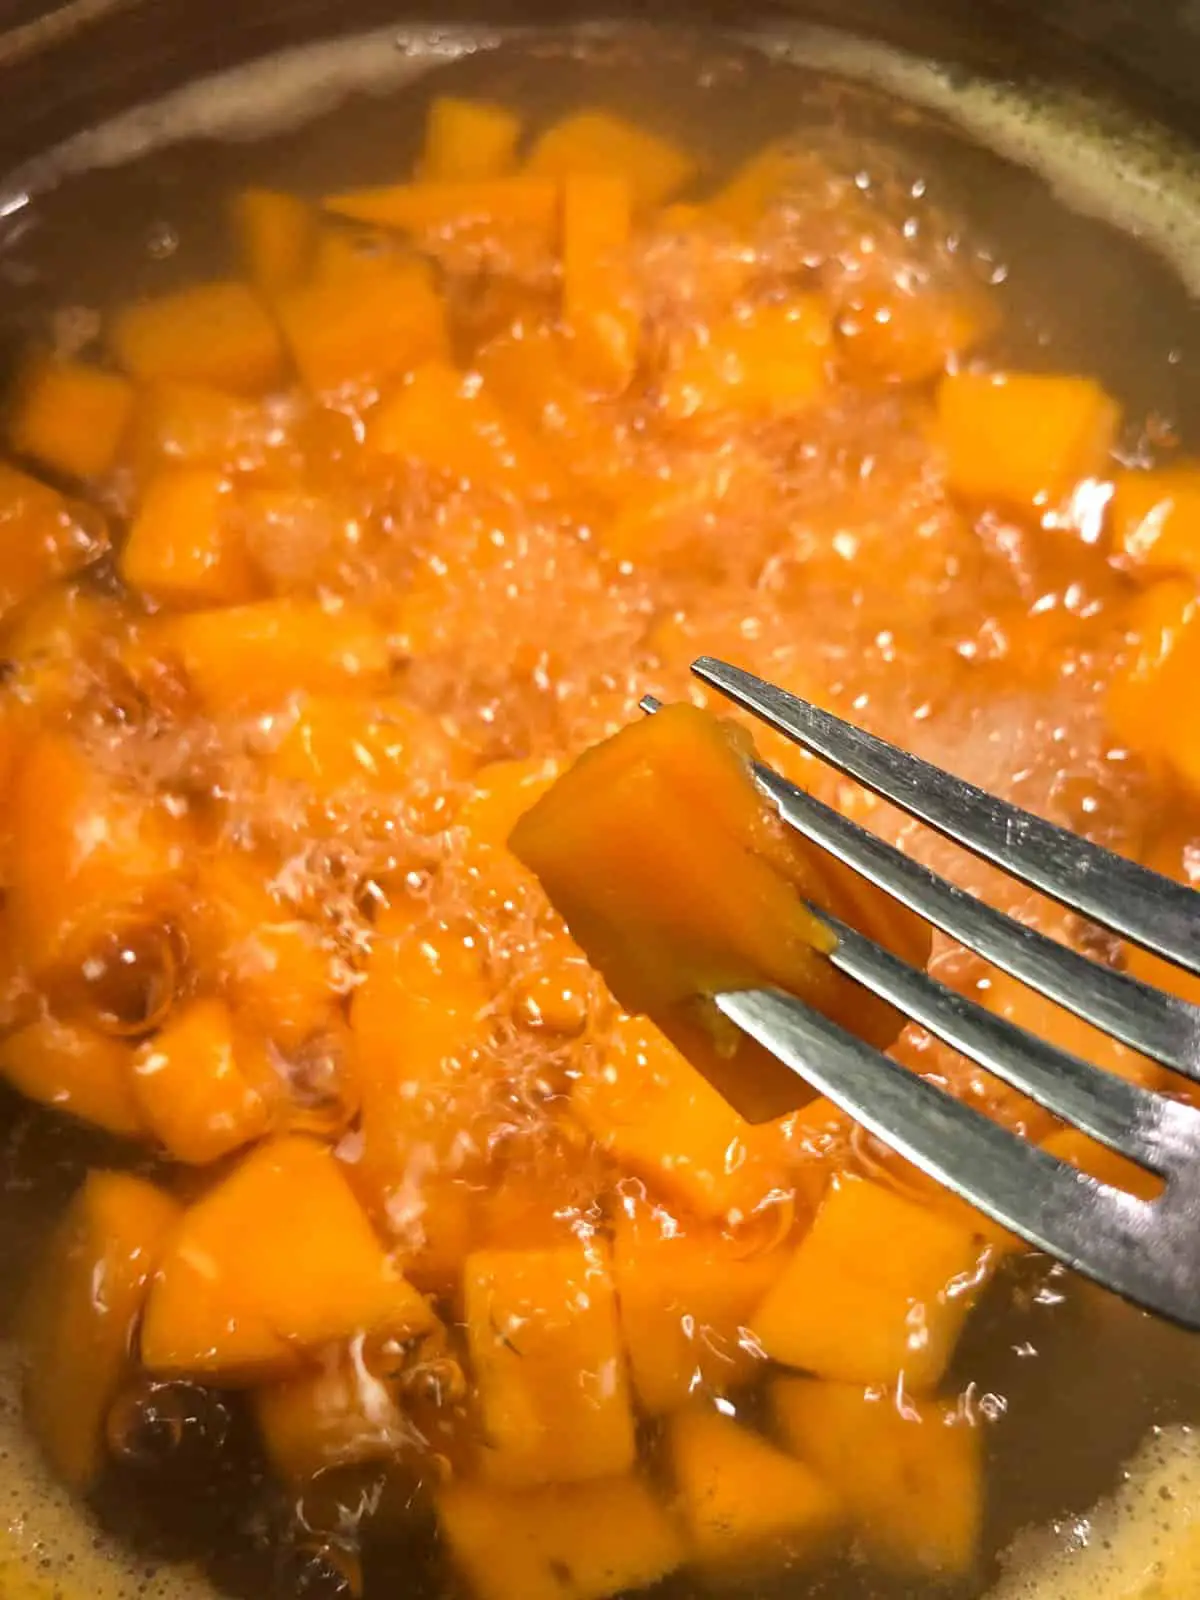 Cubes of sweet potatoes in boiling water in a saucepan with a fork piercing one of the sweet potato cubes in the foreground.